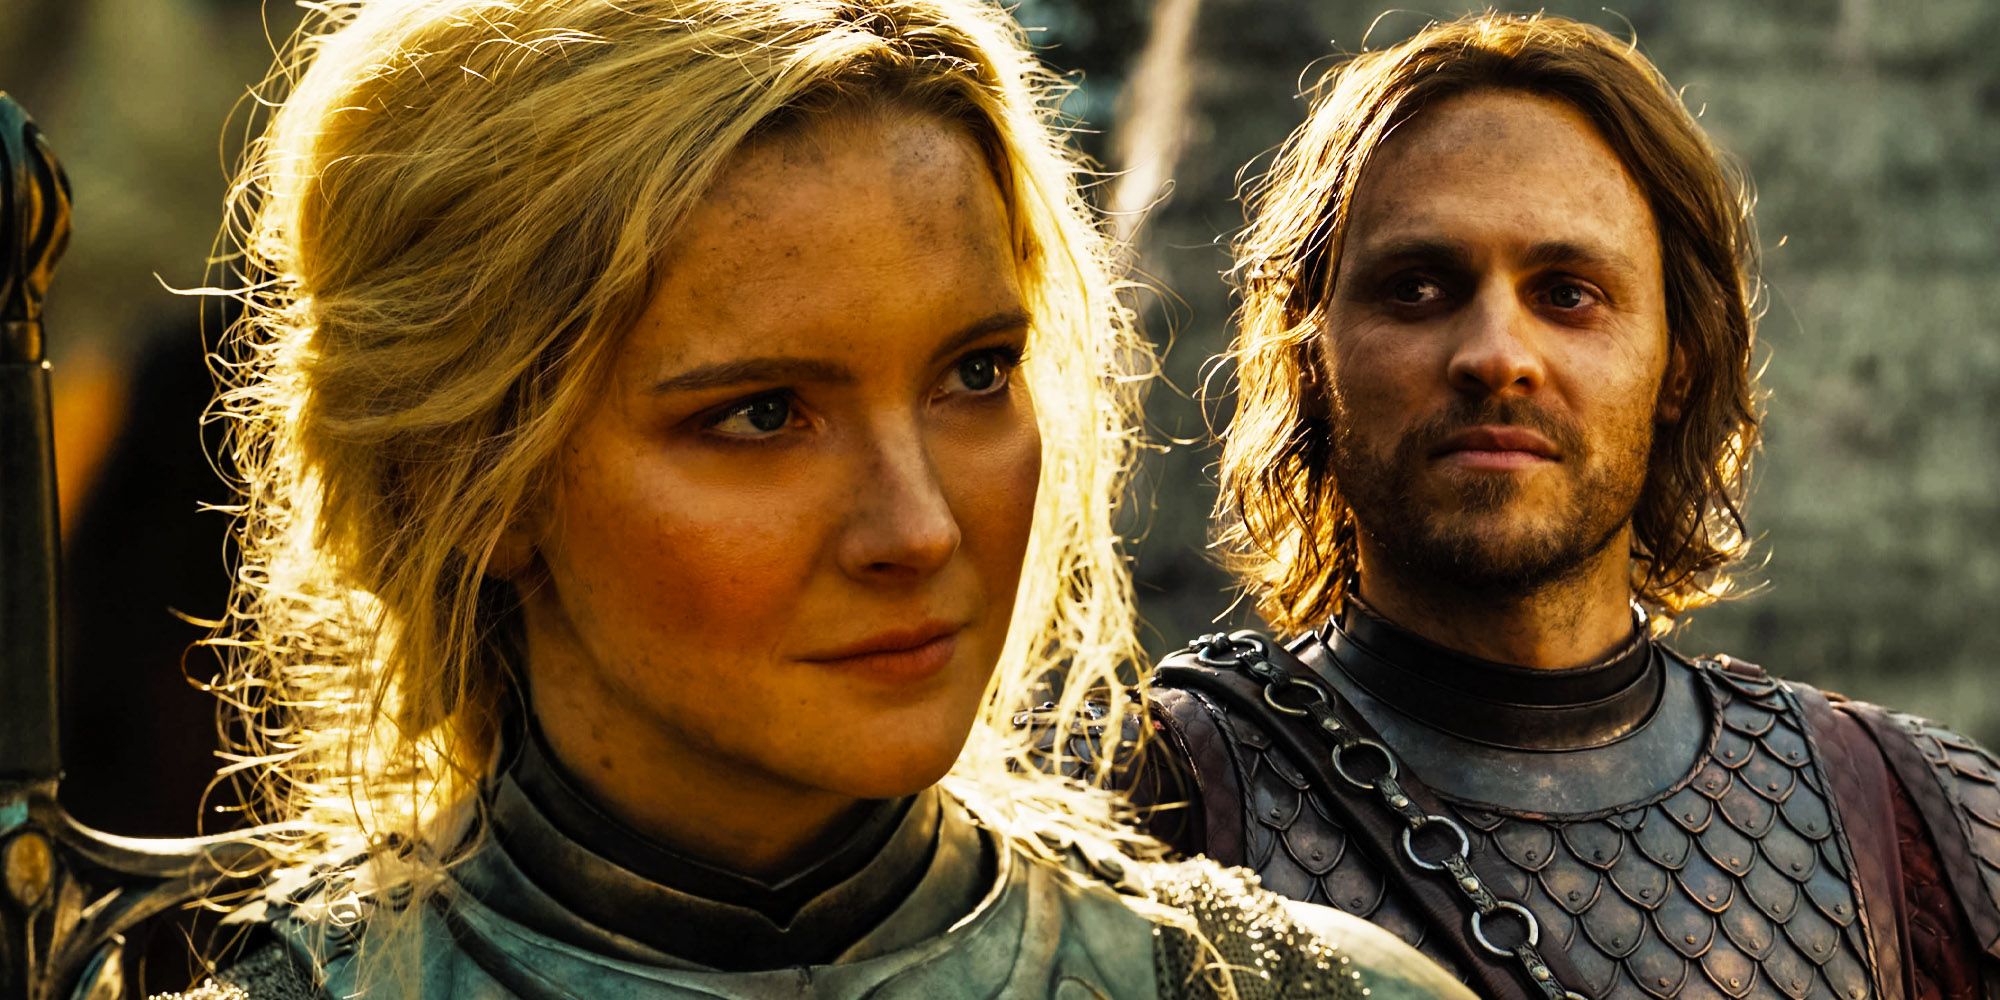 Did Rings Of Power Actually Break Canon By Killing Galadriel's Husband?